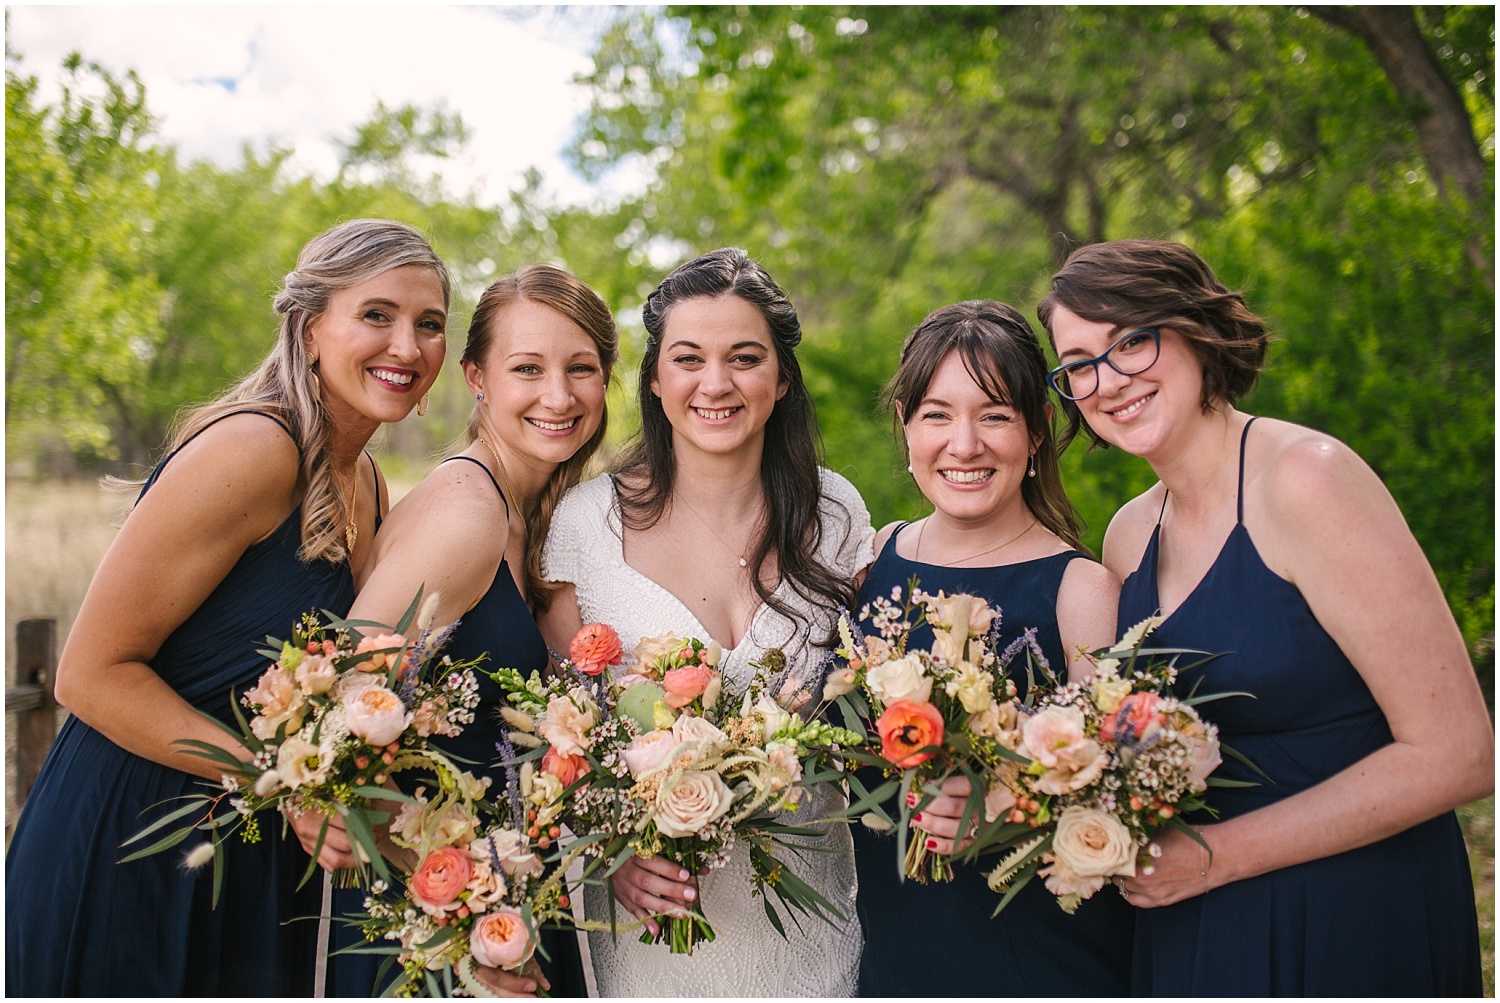 Bridesmaids in blue dresses with coral-colored desert bouquets by Floriography Flowers at Hyatt Regency Tamaya wedding in New Mexico